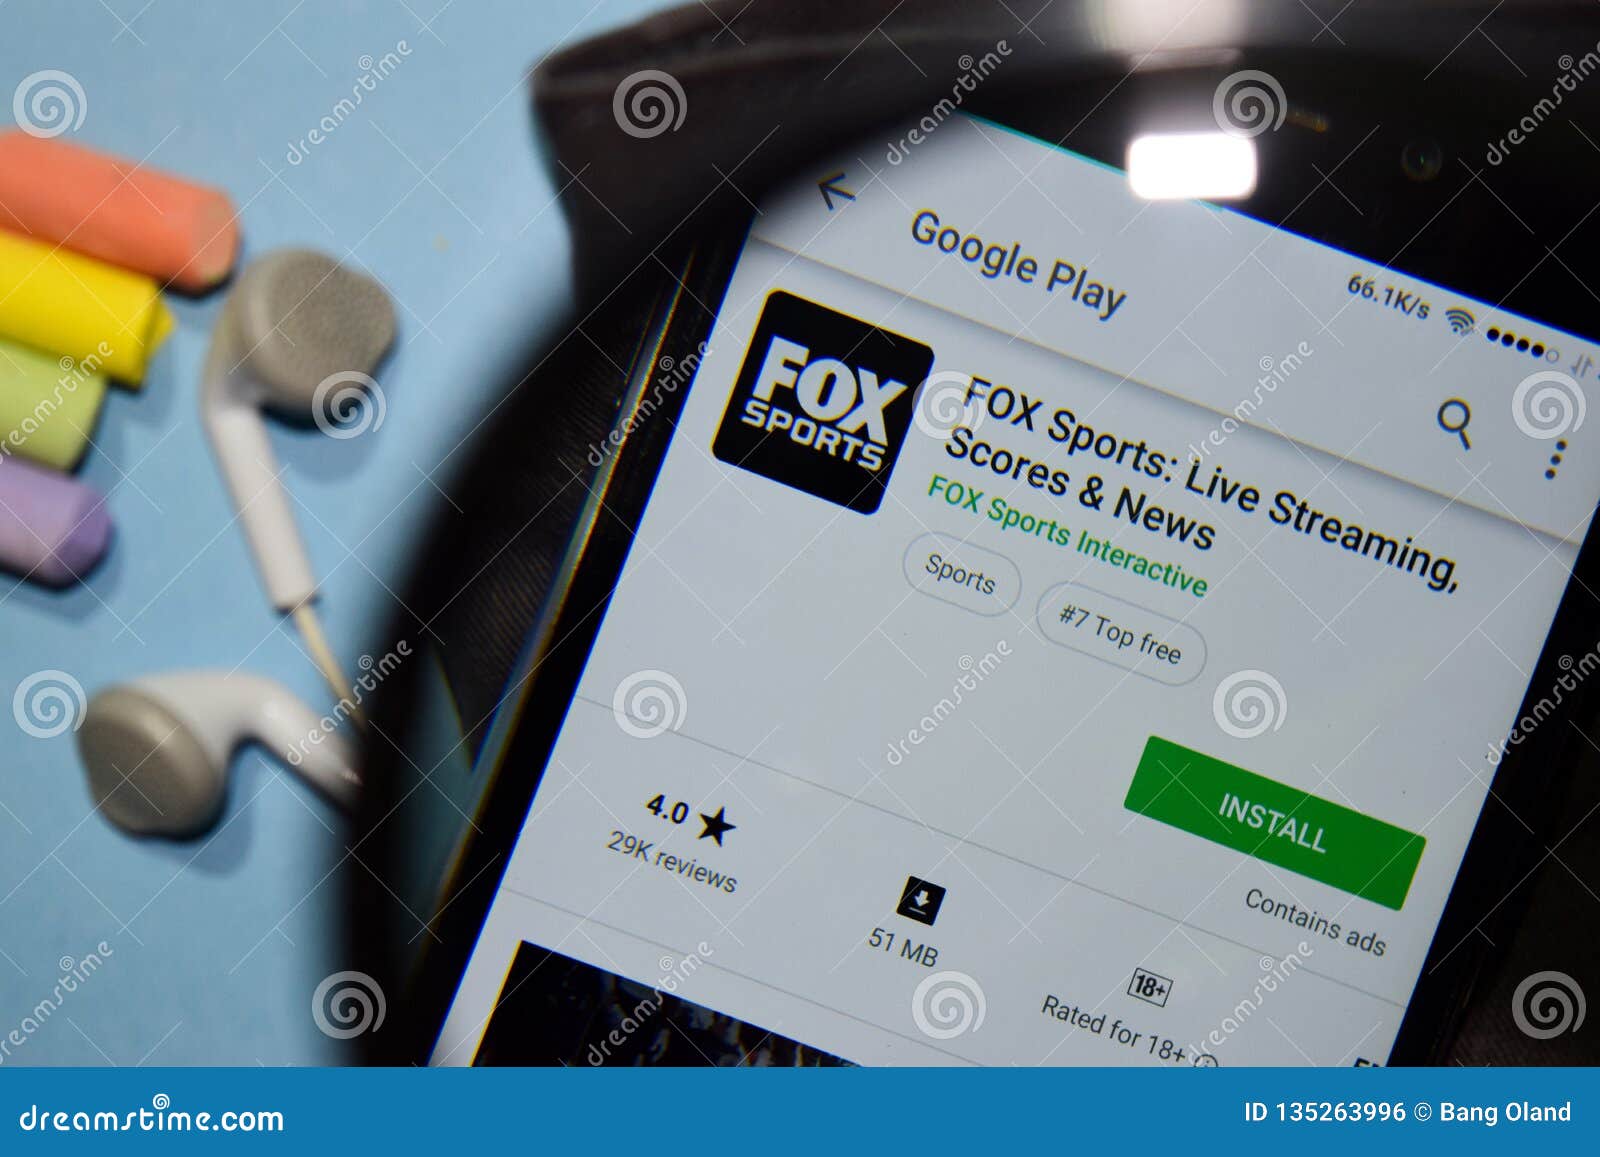 FOX Sports Live Streaming, Score and News Dev App with Magnifying on Smartphone Screen Editorial Photo